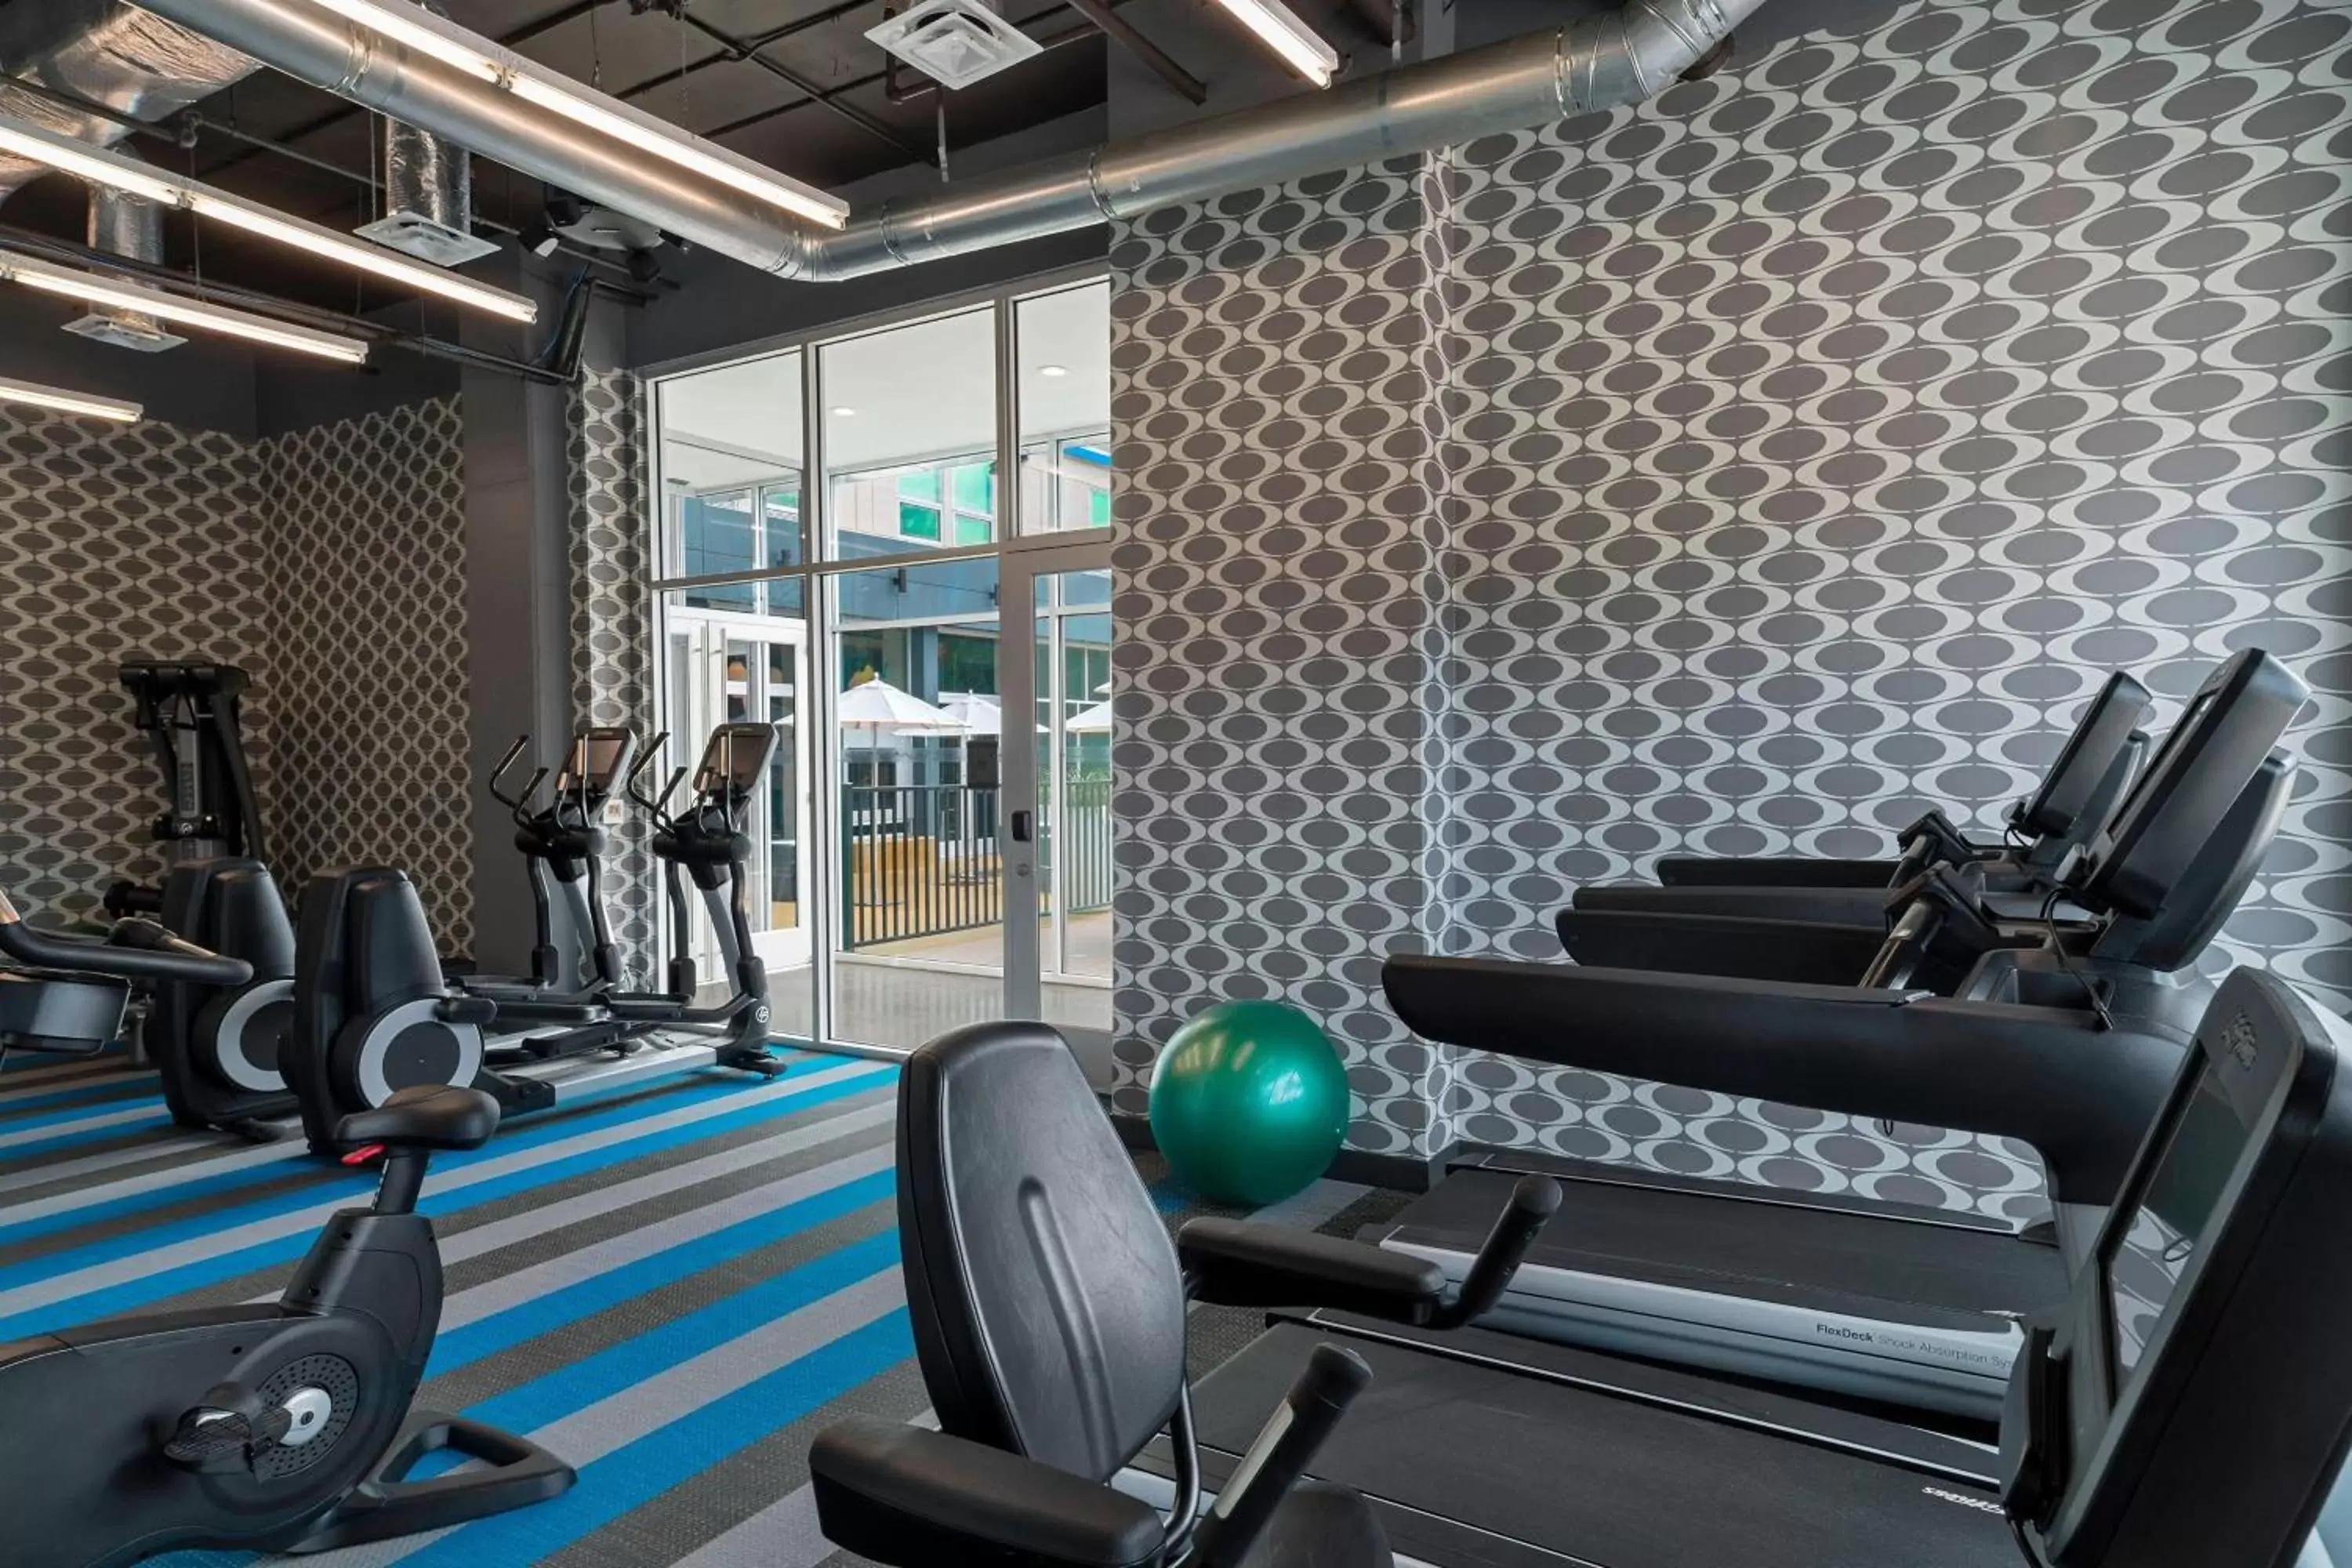 Fitness centre/facilities, Fitness Center/Facilities in Aloft College Station